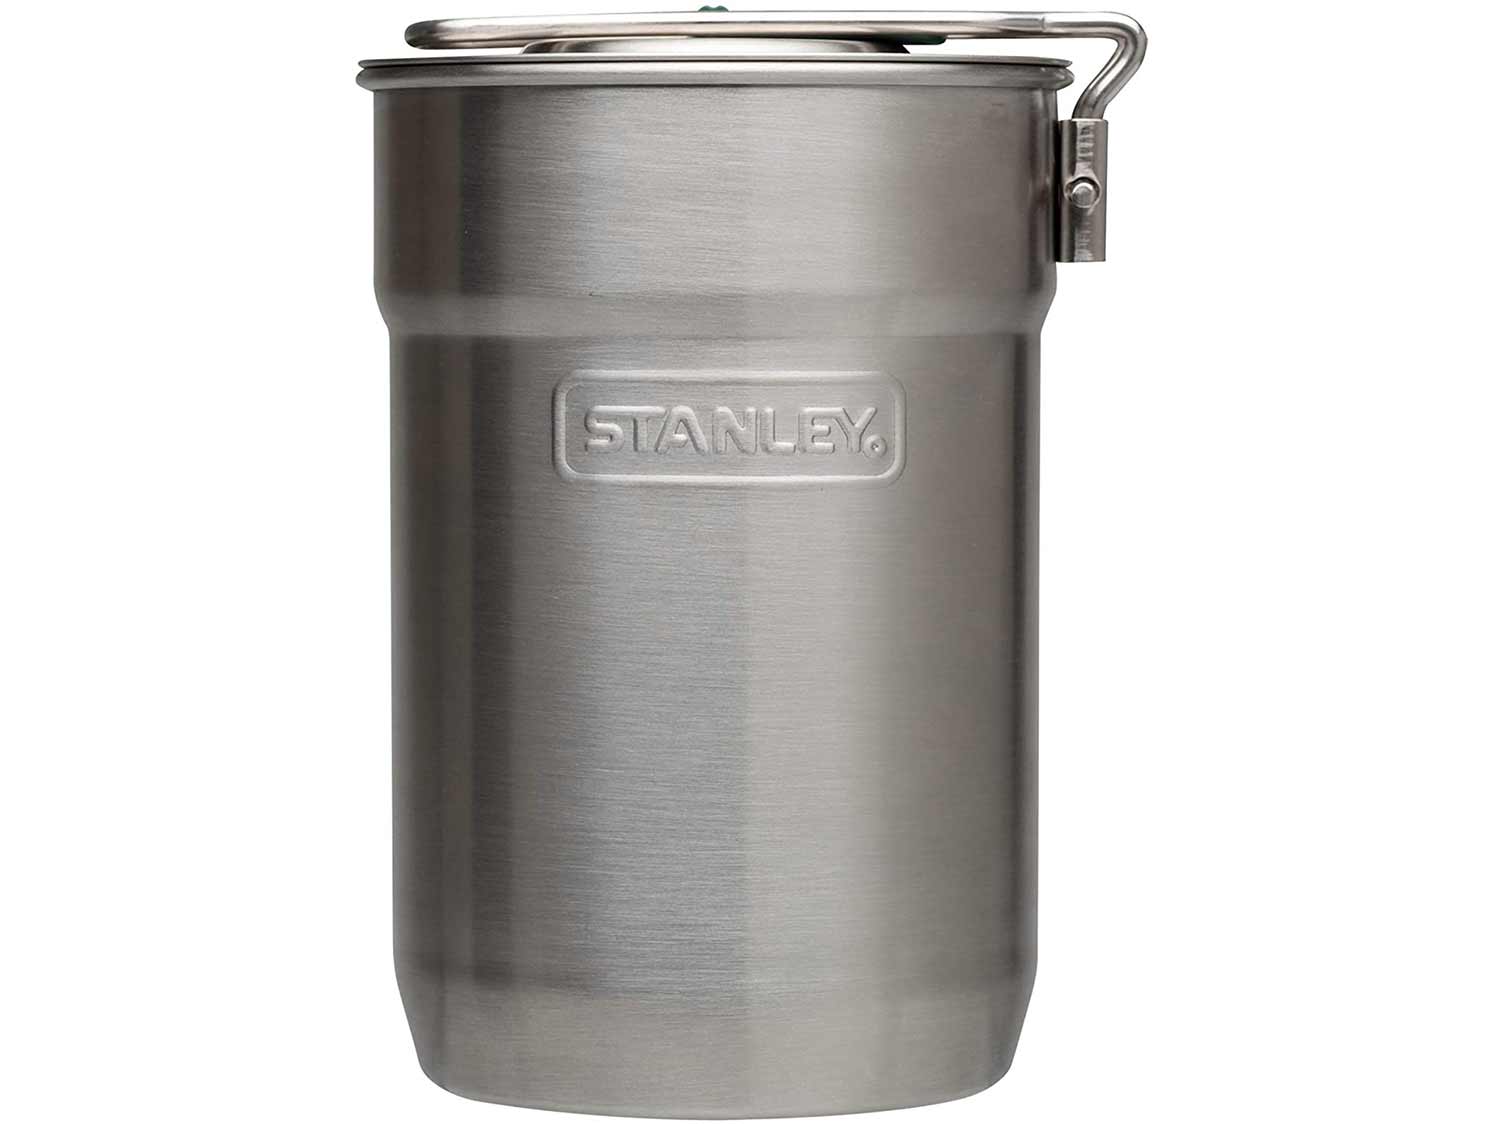 Stanley stainless steel cooking pot.